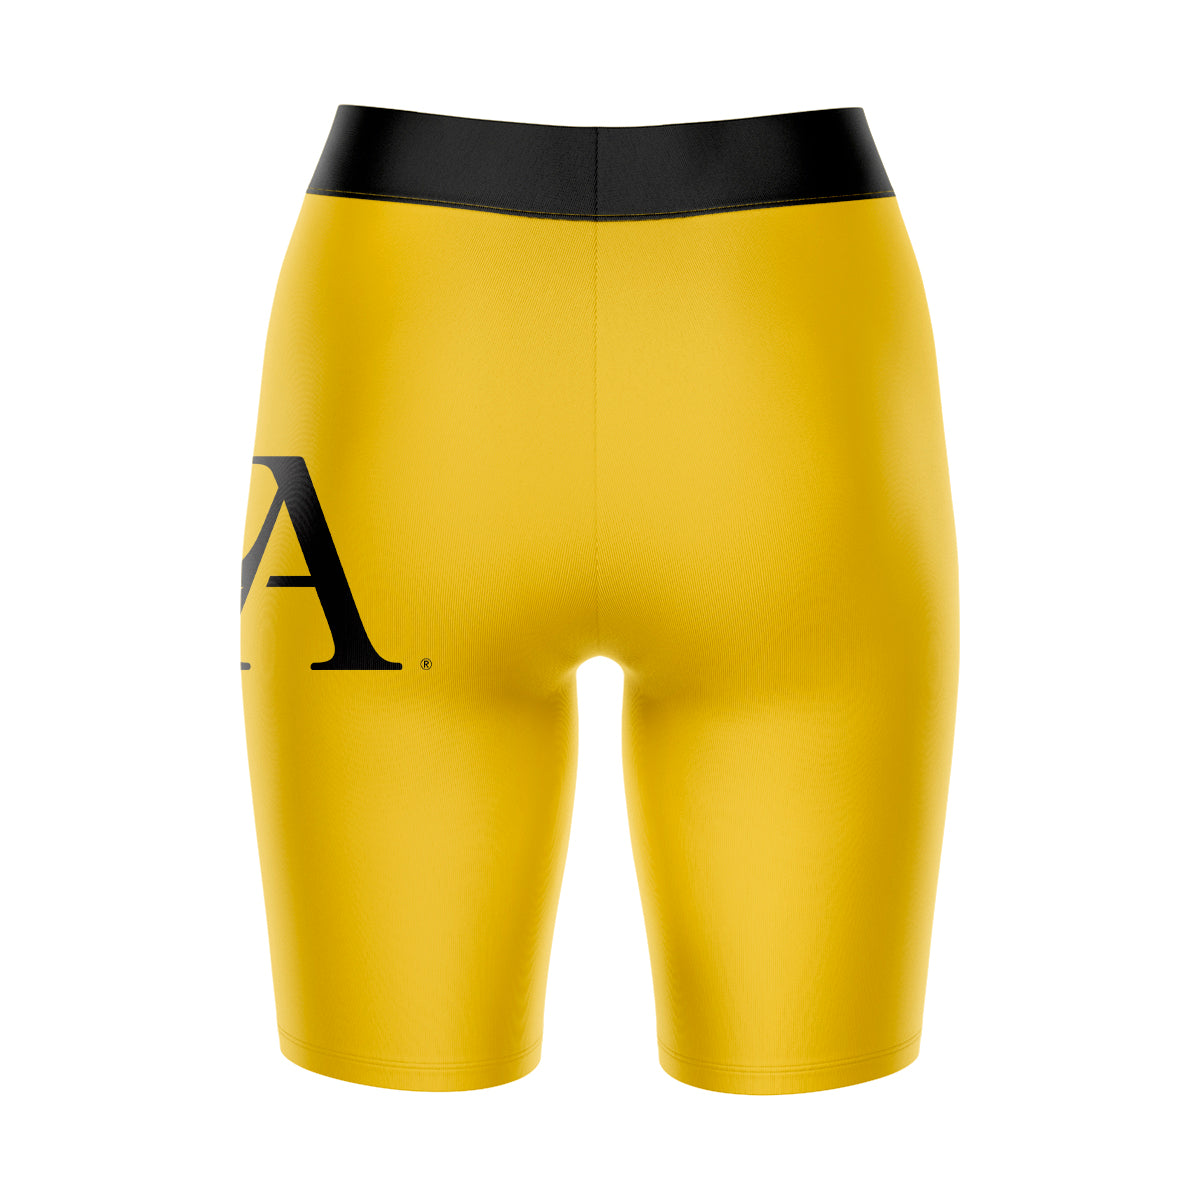 Cal State LA Golden Eagles Vive La Fete Game Day Logo on Thigh and Waistband Gold and Black Women Bike Short 9 Inseam